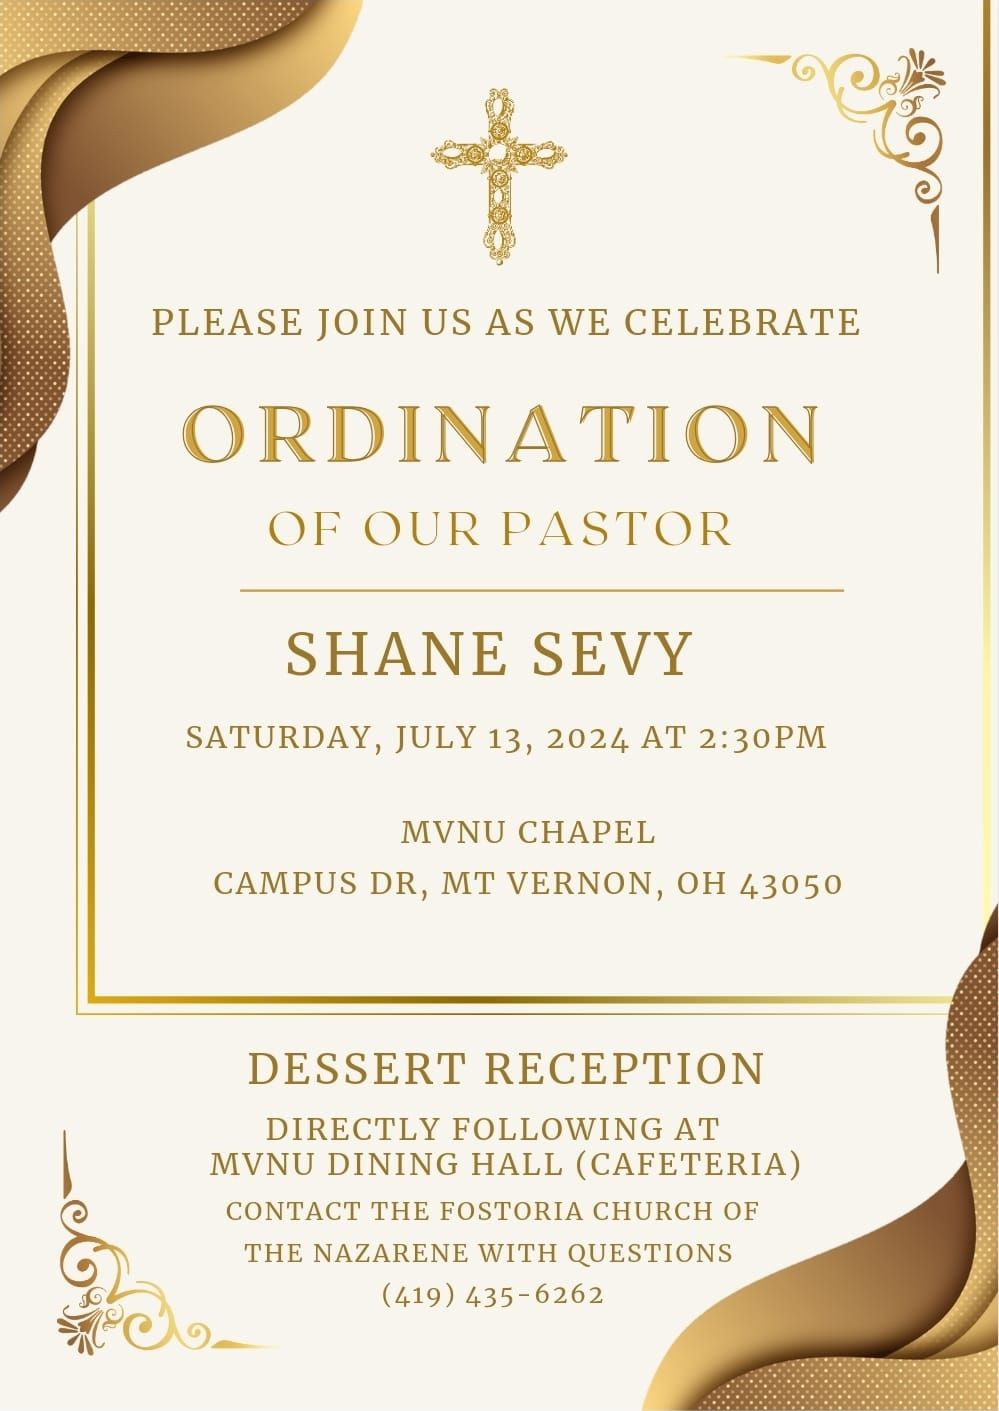 Join us for the Ordination of our Pastor Shane Sevy!